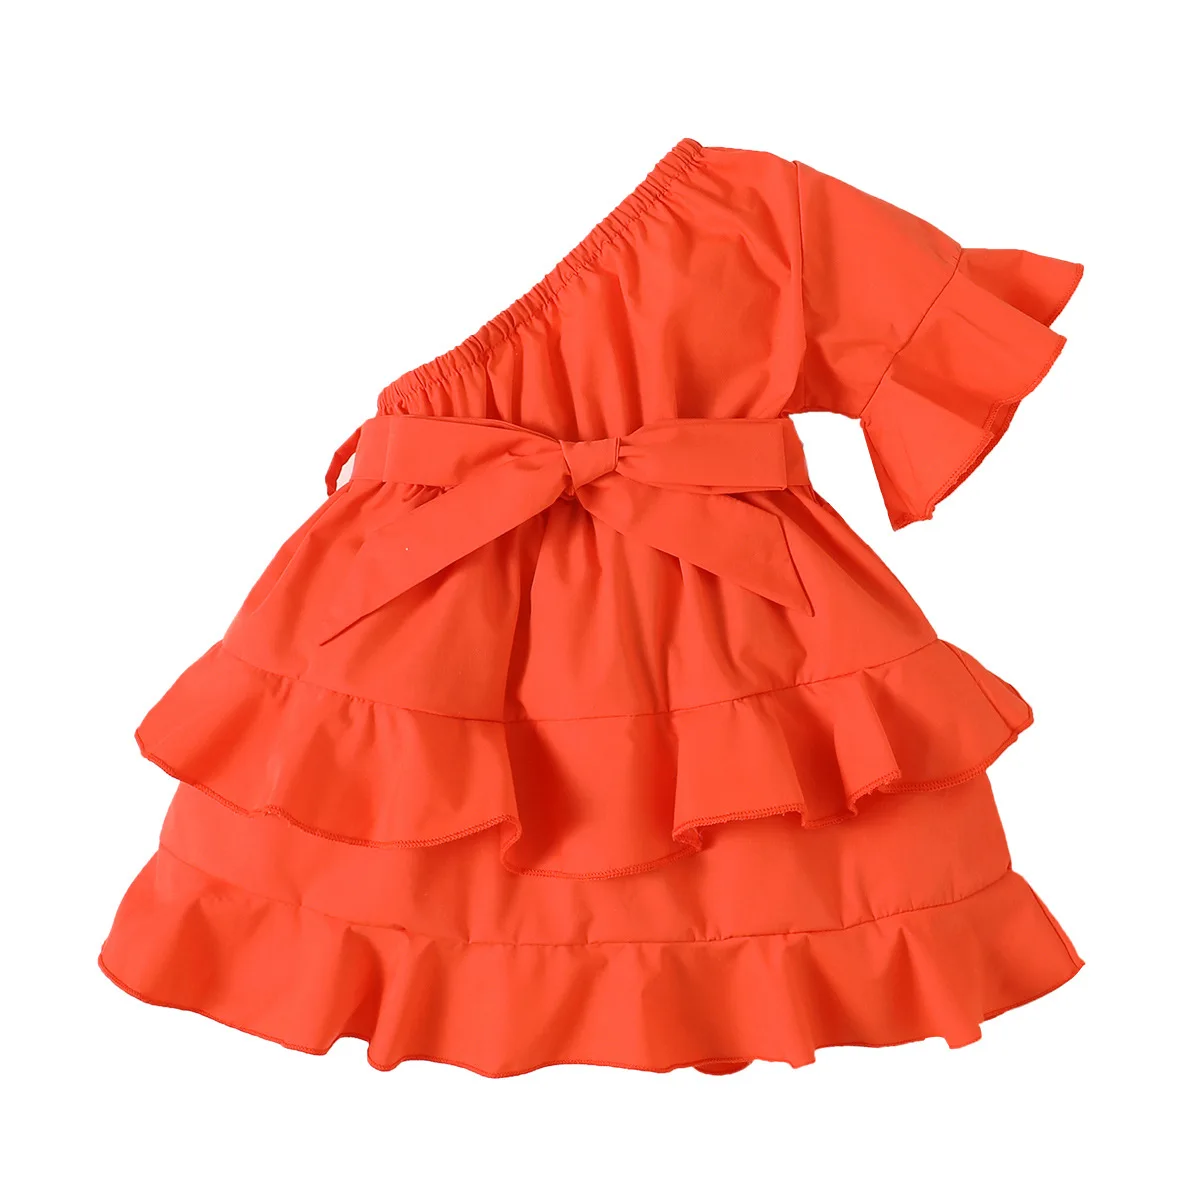 fancy baby dresses Toddler Kids Girls Summer Casual Dresses One Shoulder Solid Belt Bowknot Layered Dress Sundress Clothes Drop Shipping cute baby dresses online Dresses